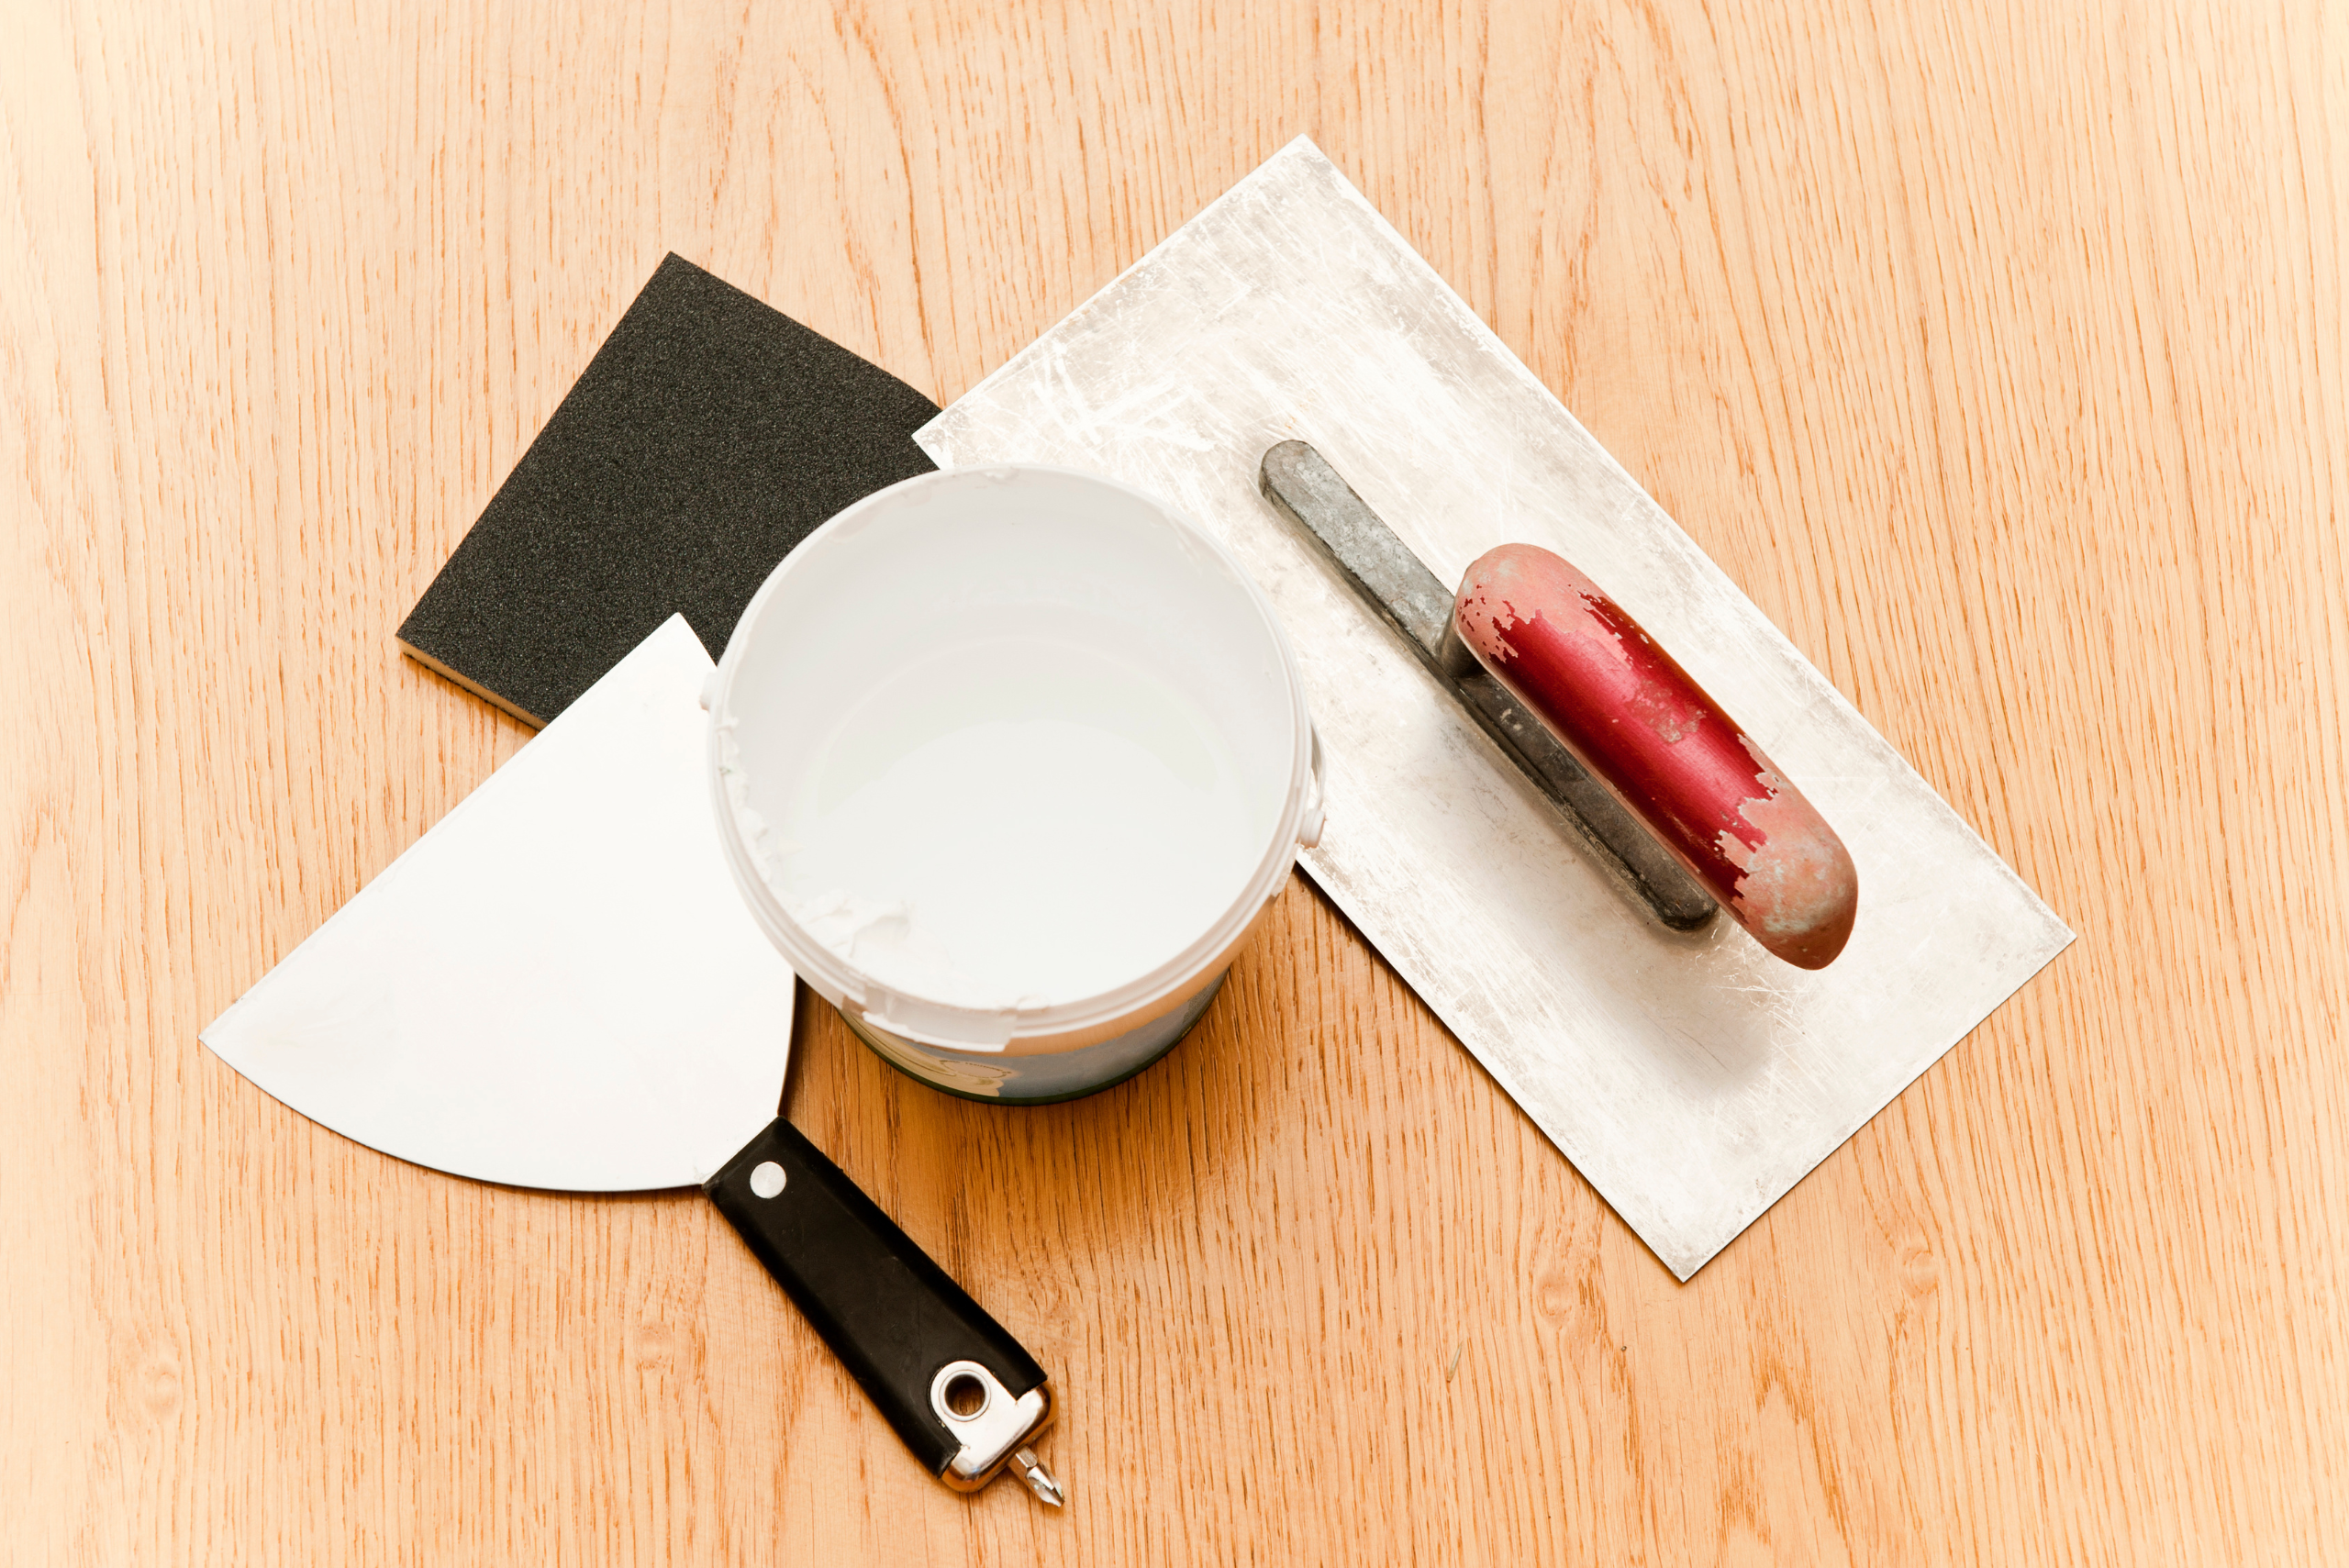 An assortment of tools and materials for repairing drywall damage.